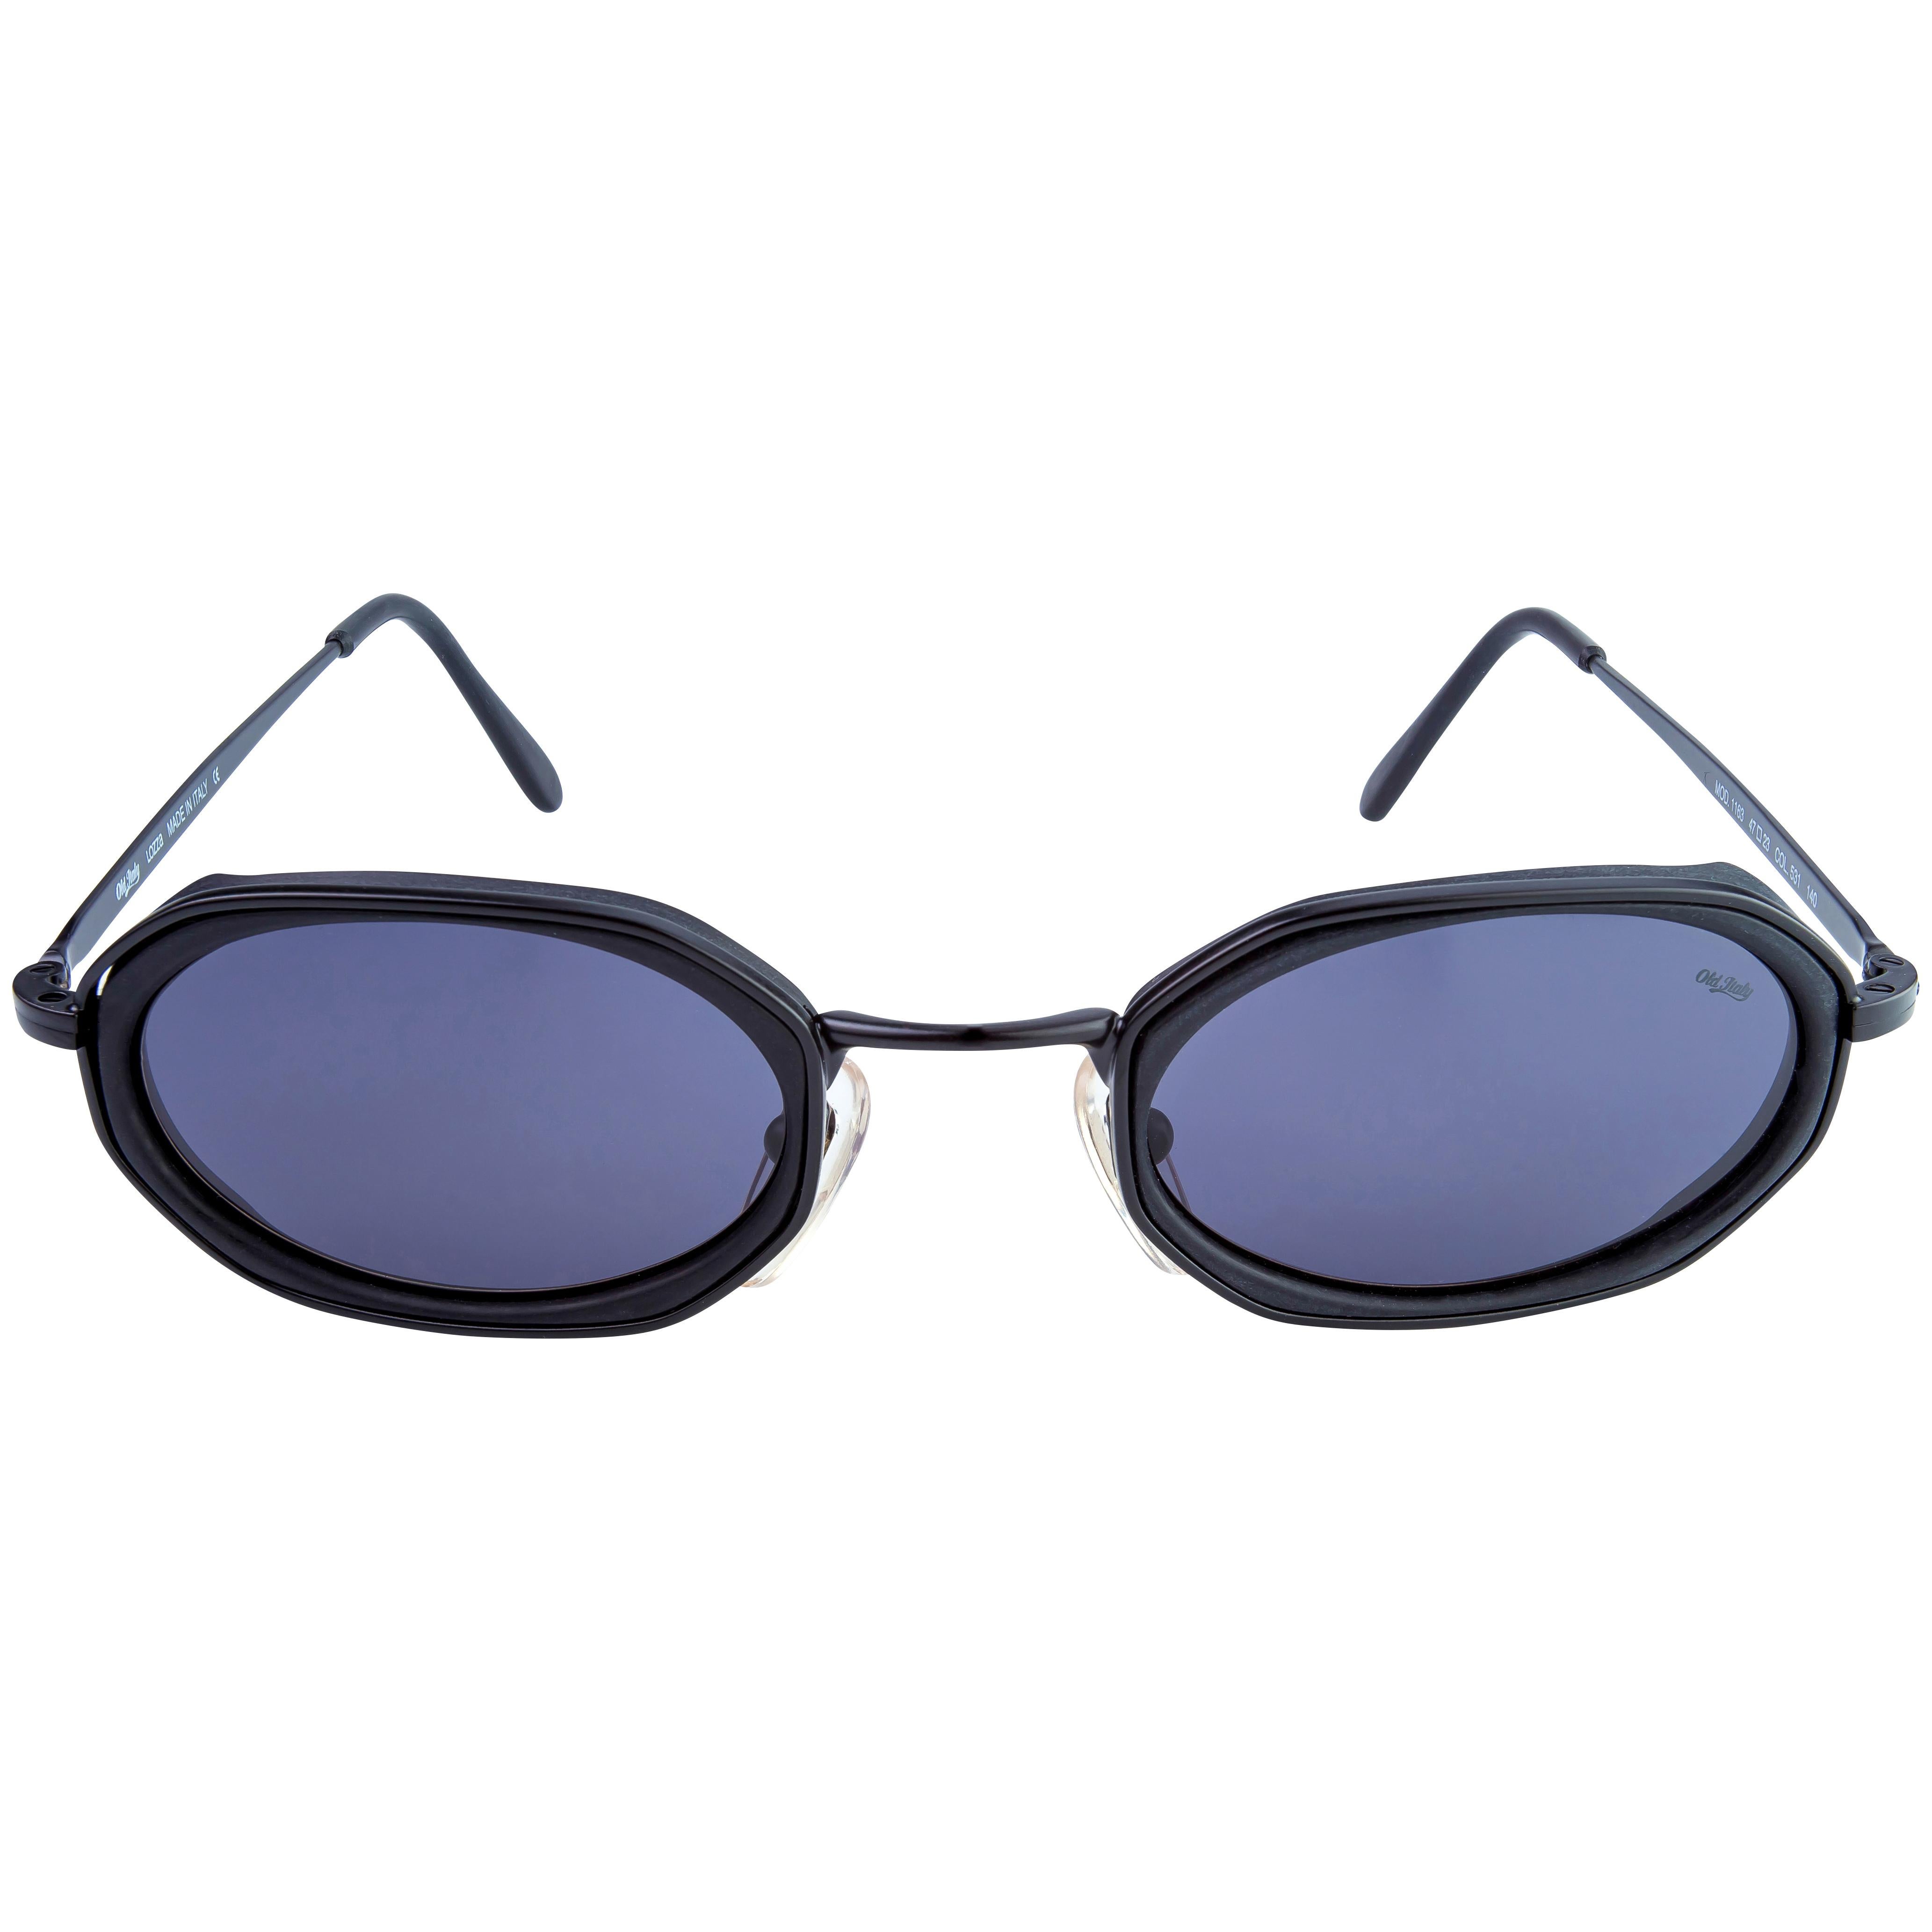 Lozza established in 1878, Lozza is the oldest eyewear brand in Italy, always a forerunner in its choice of styles and materials: in the '20s it launched the first sunglasses in cellulose and in the '30s the folding frames; in the '50s it launched